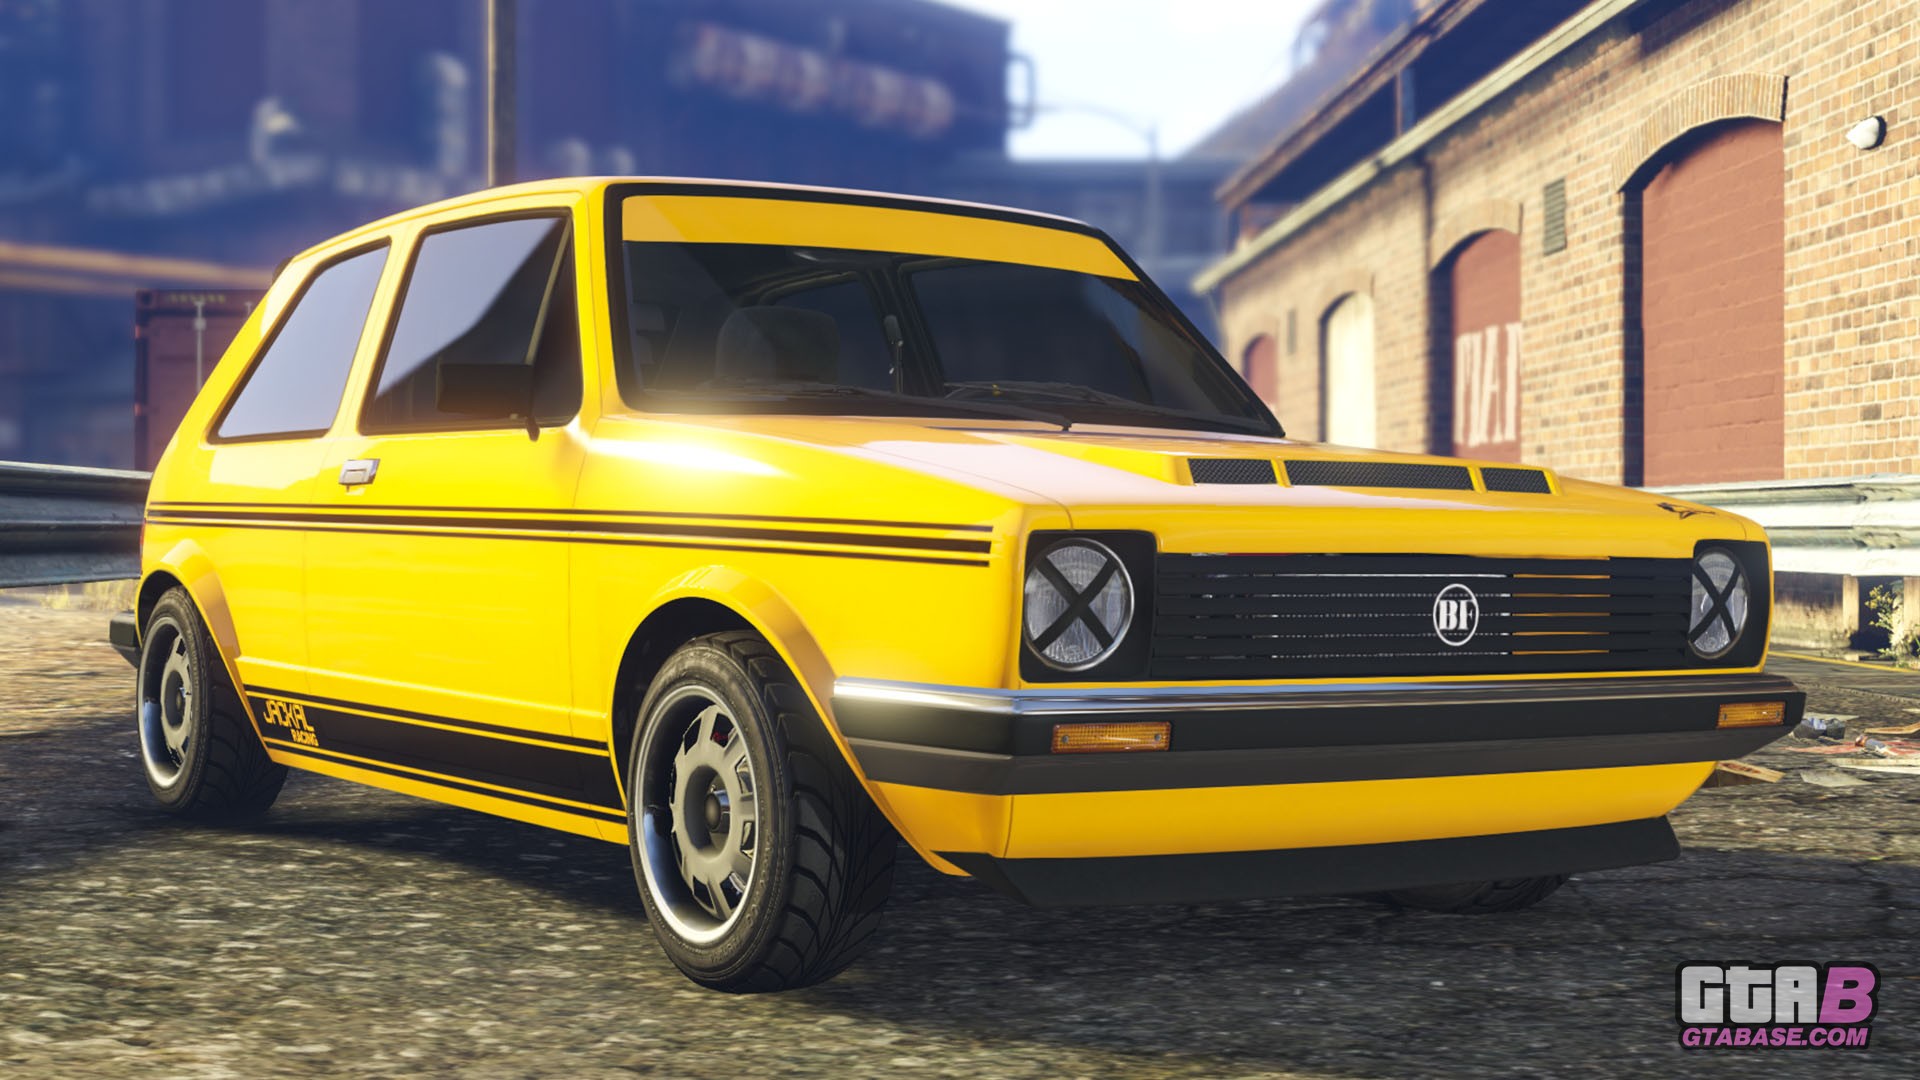 What are the Latest Cars in Gta 5: Price and How to Buy